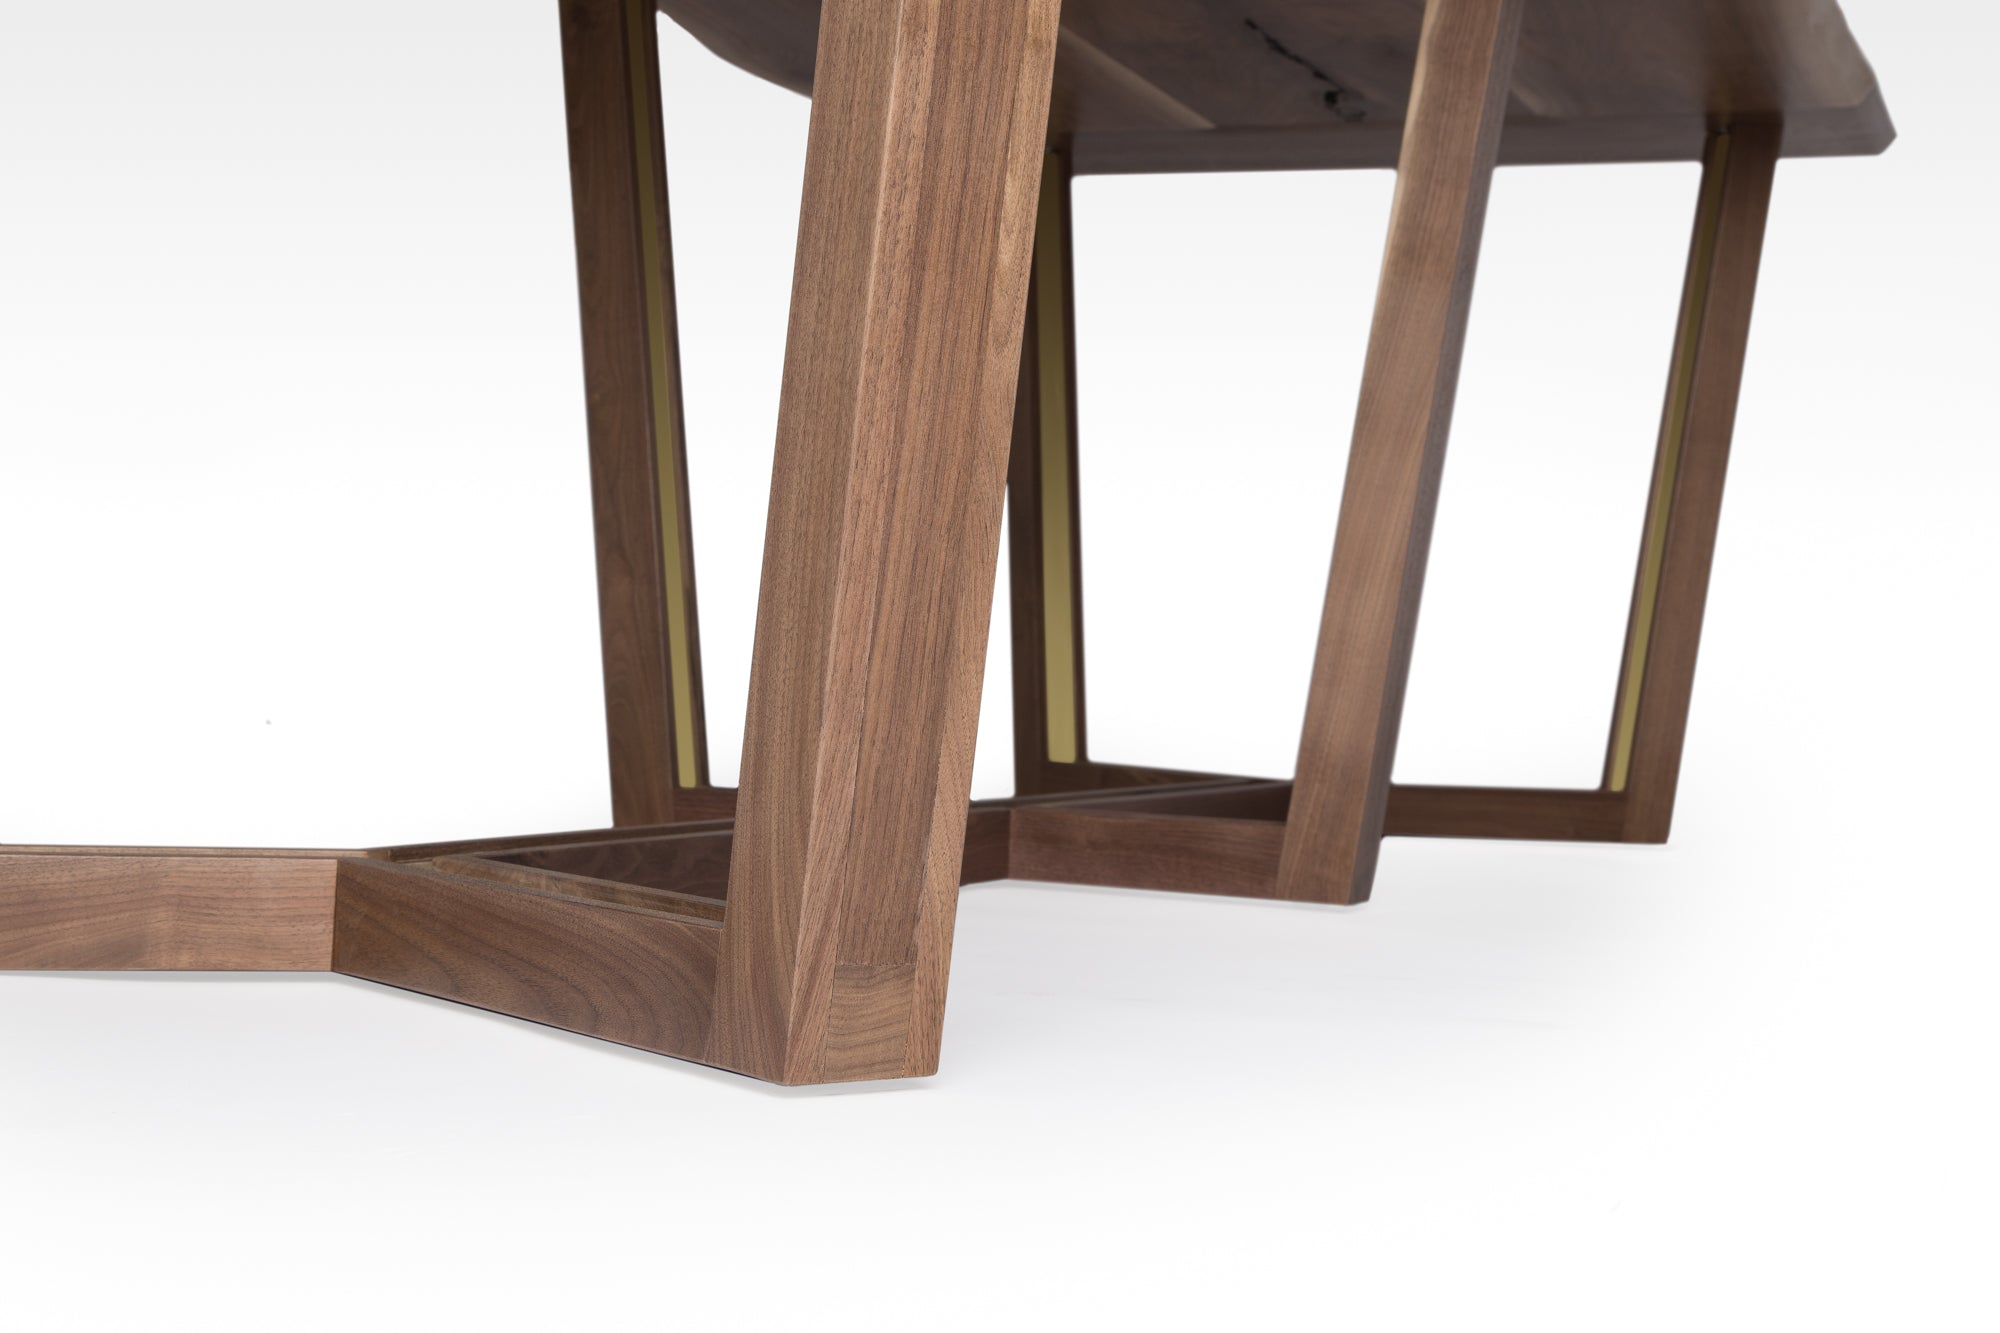 Boulevard midcentury modern walnut brass Dining Table handcrafted by Hunt & Noyer in Michigan